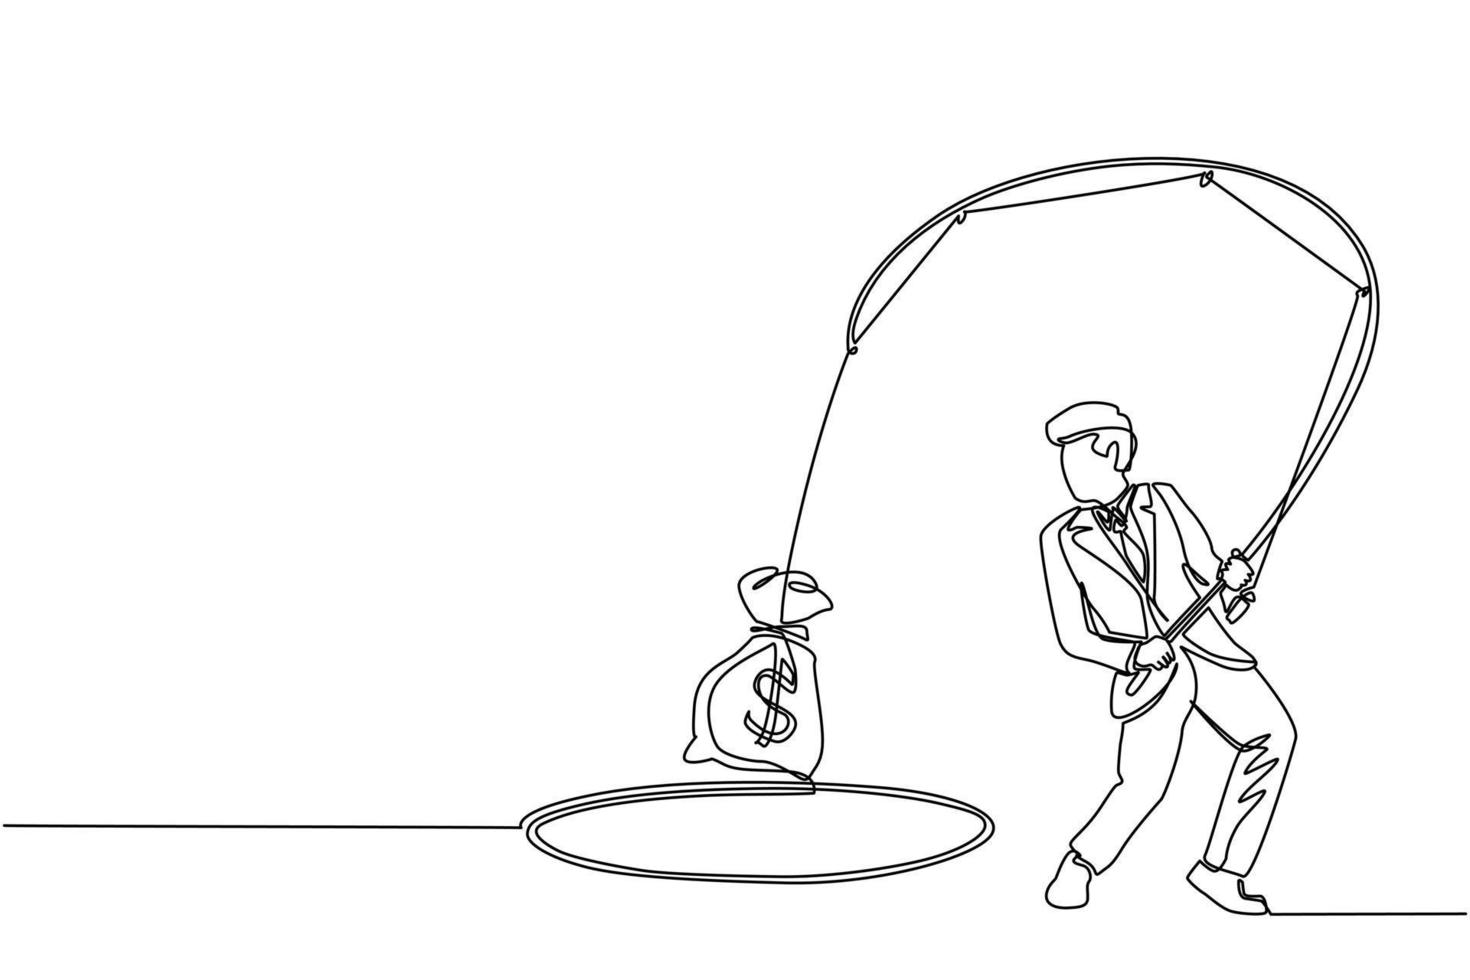 Continuous one line drawing businessman holding fishing rod got big money bag from hole. Man catching money bag with fishing rod. Business concept. Single line draw design vector graphic illustration